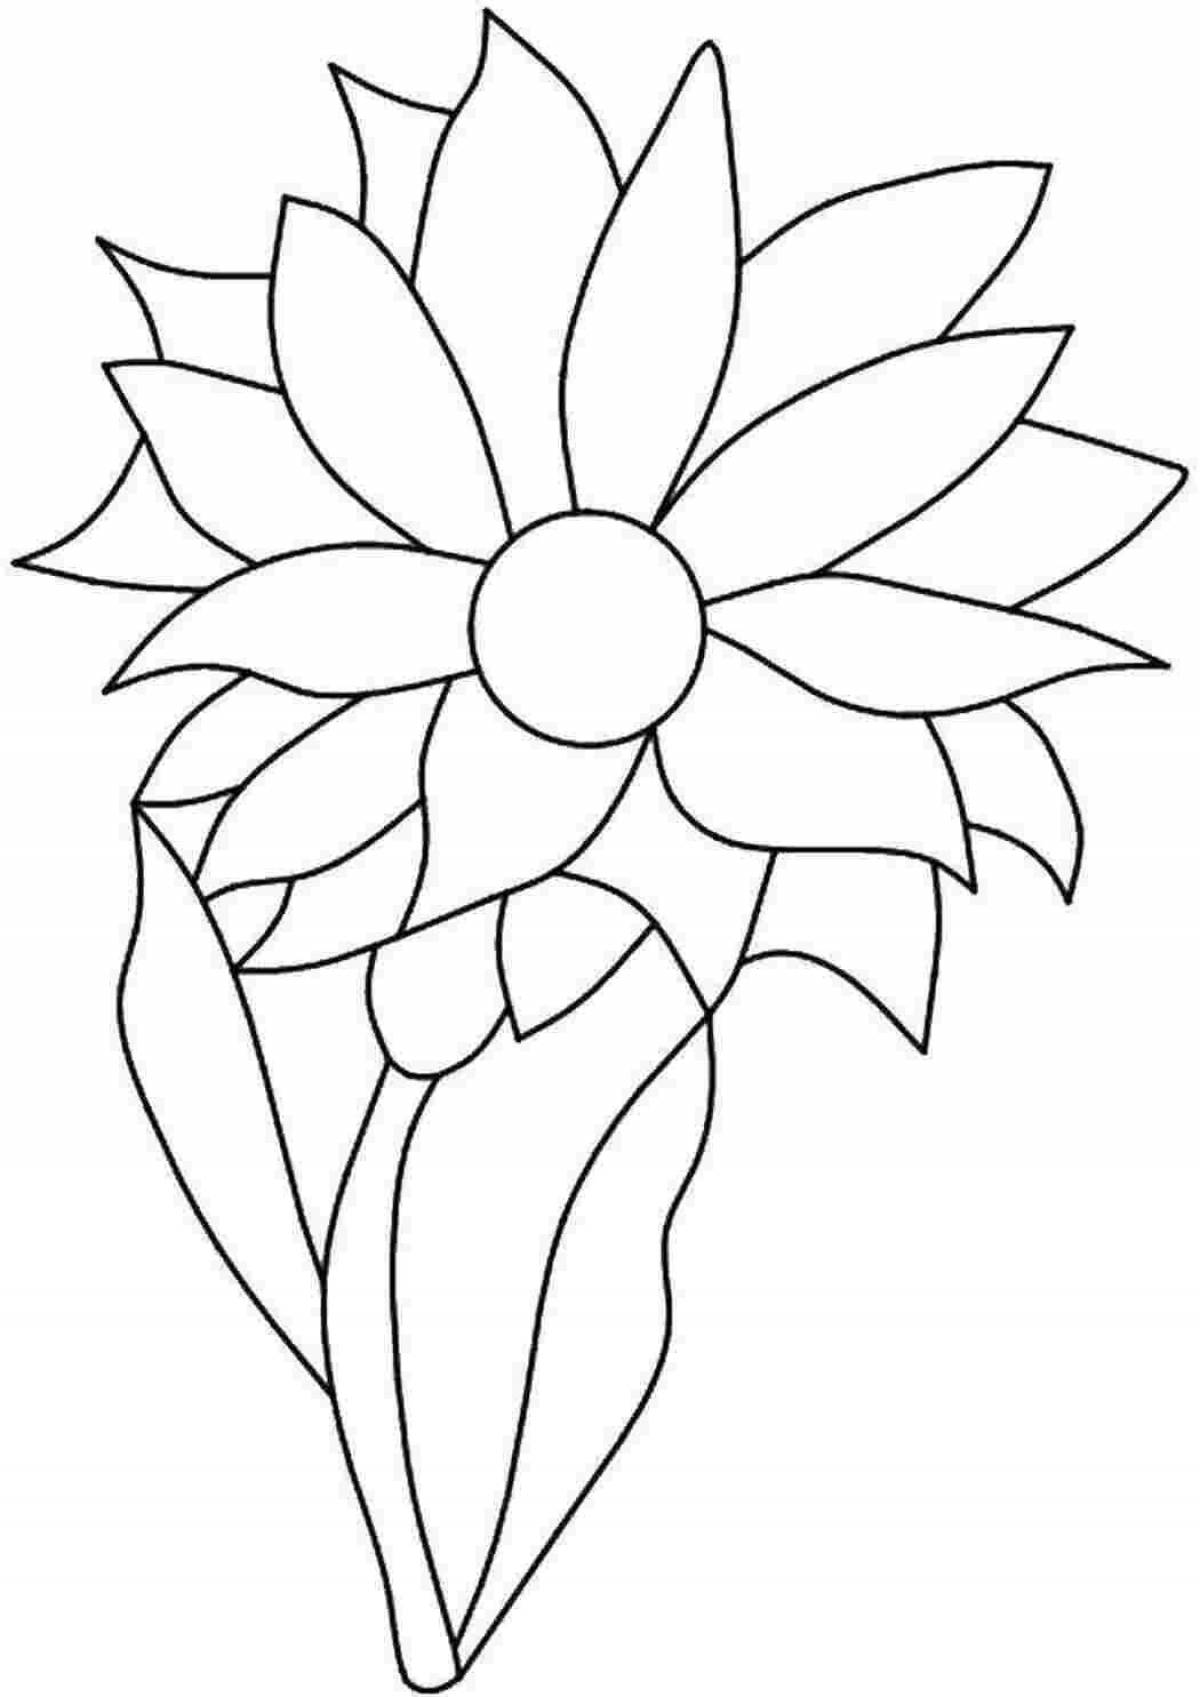 Coloring dreamy unknown flower